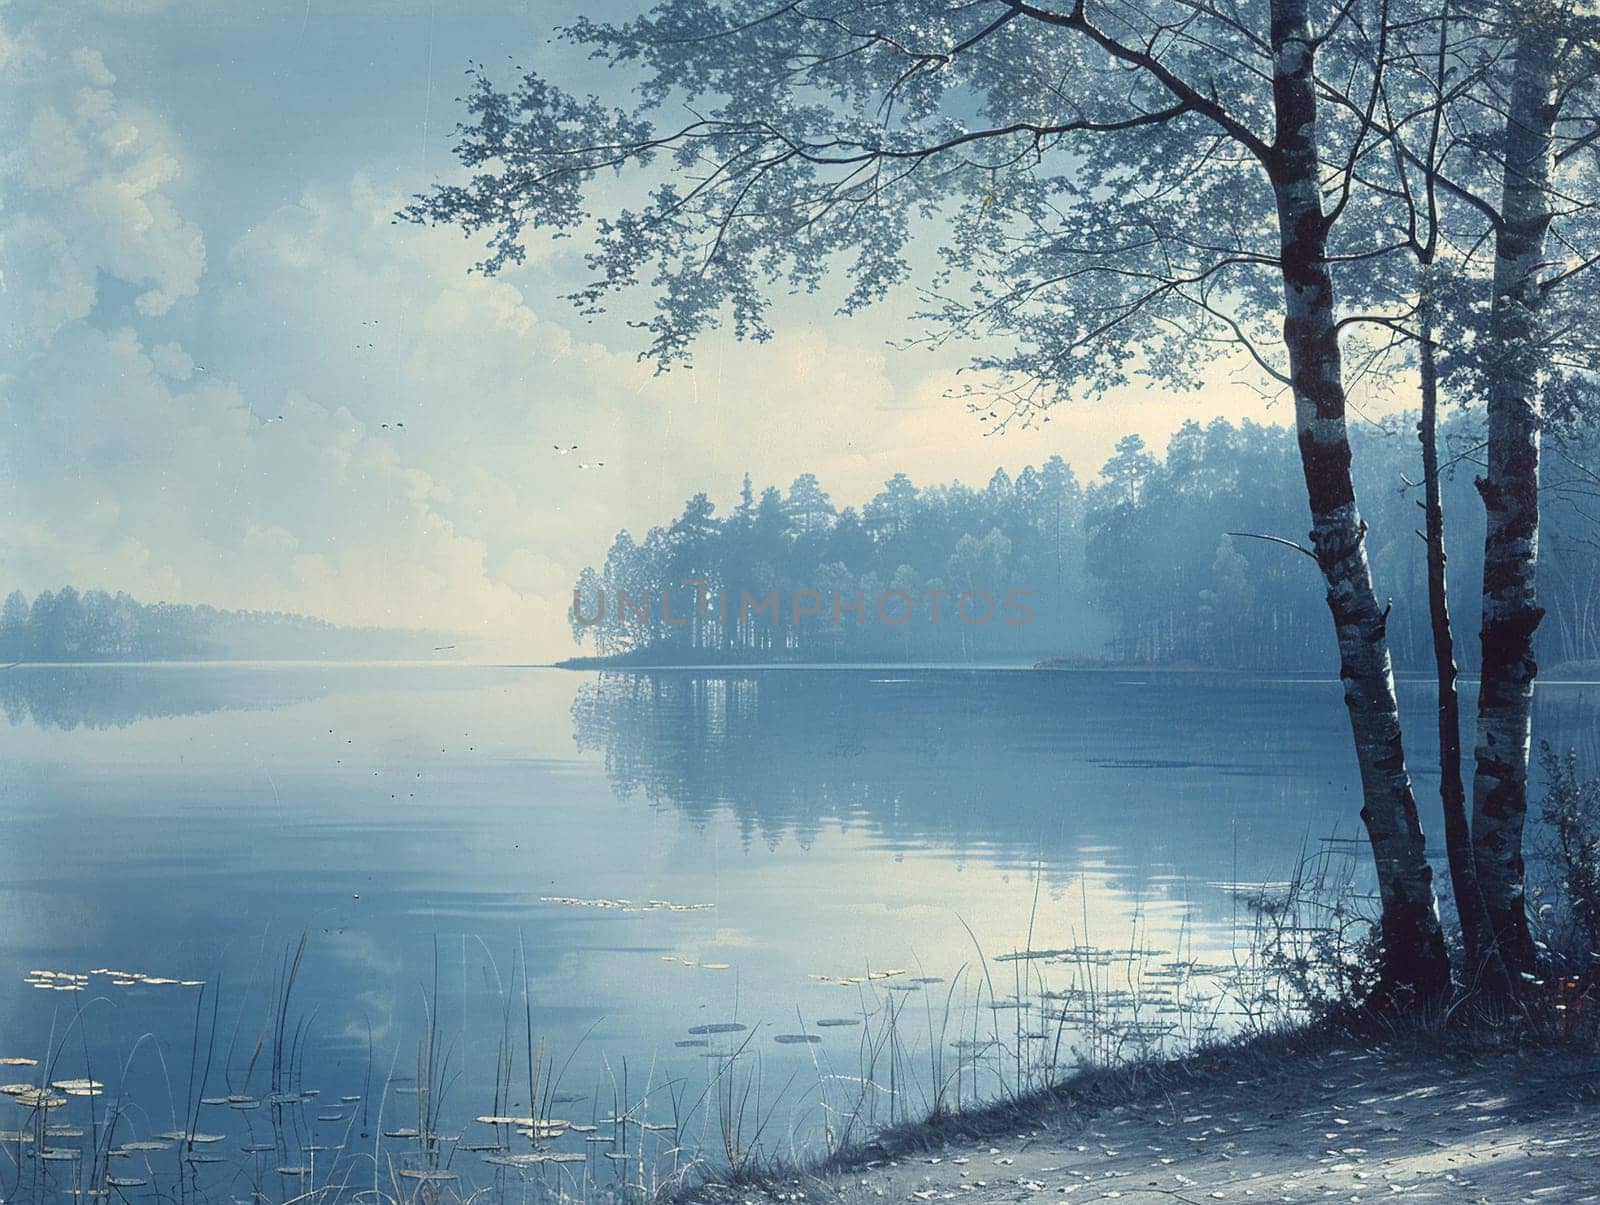 Drawing of a serene lakeside view, beautifully rendered in acrylics with reflections in the water.